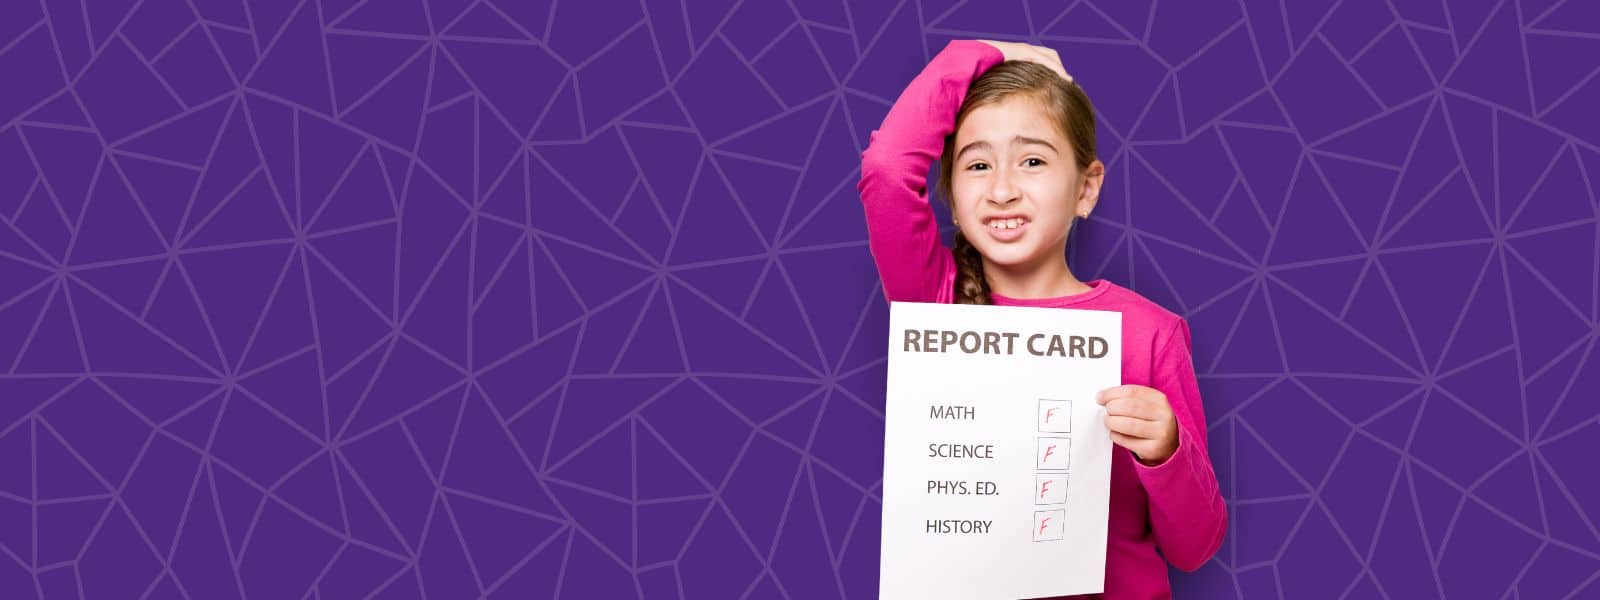 Tips for Handling a Bad Report Card